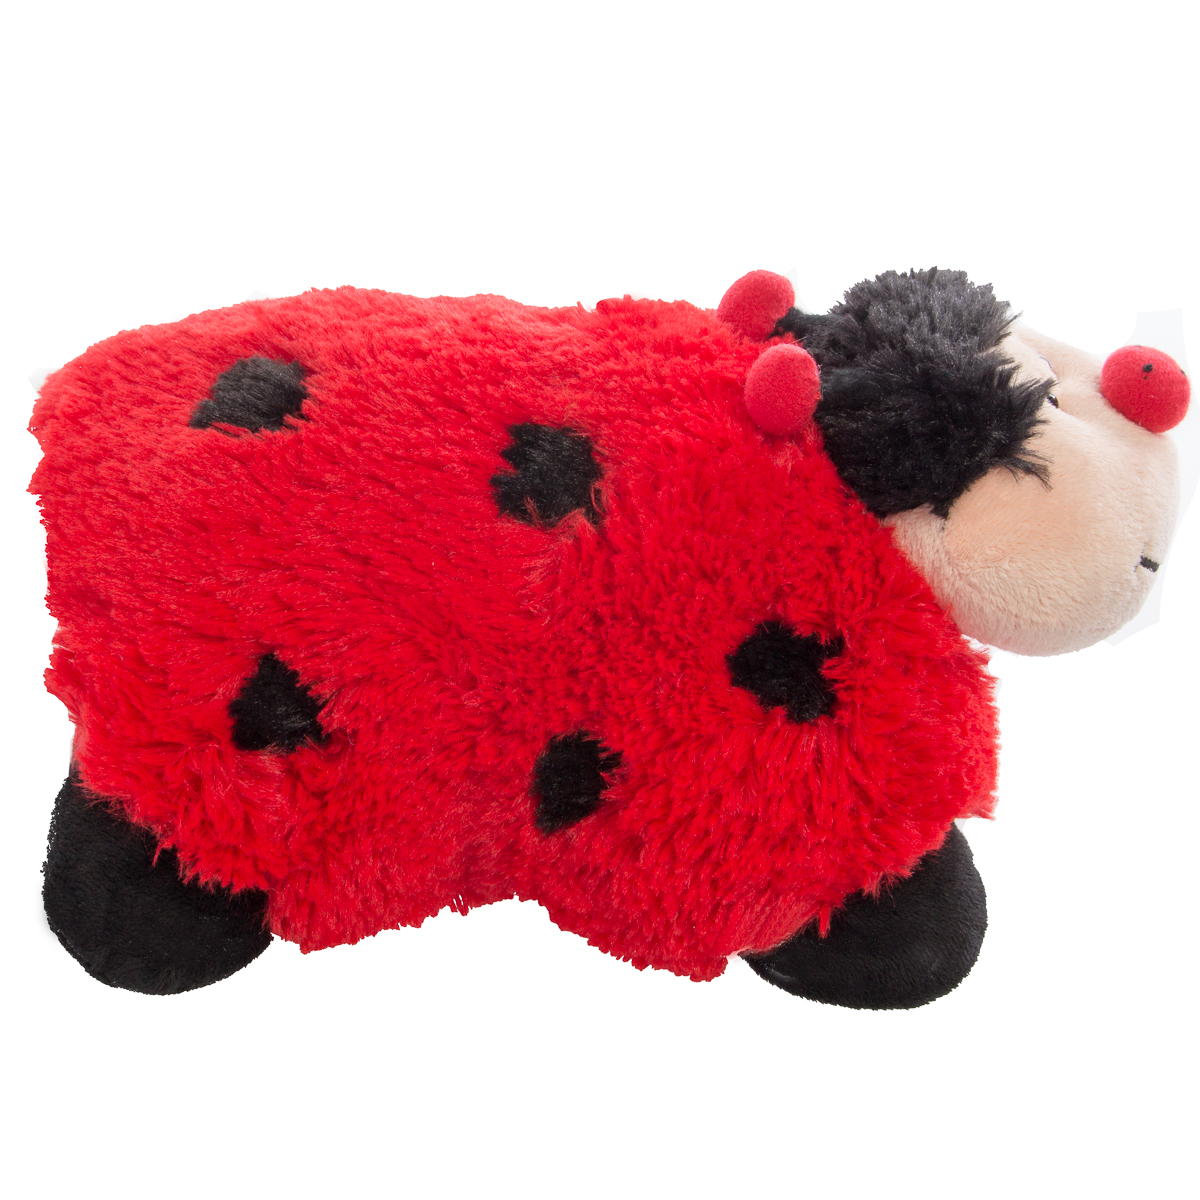 As Seen on TV Pillow Pet Lady Bug Pee Wee, 1 Each - image 3 of 3